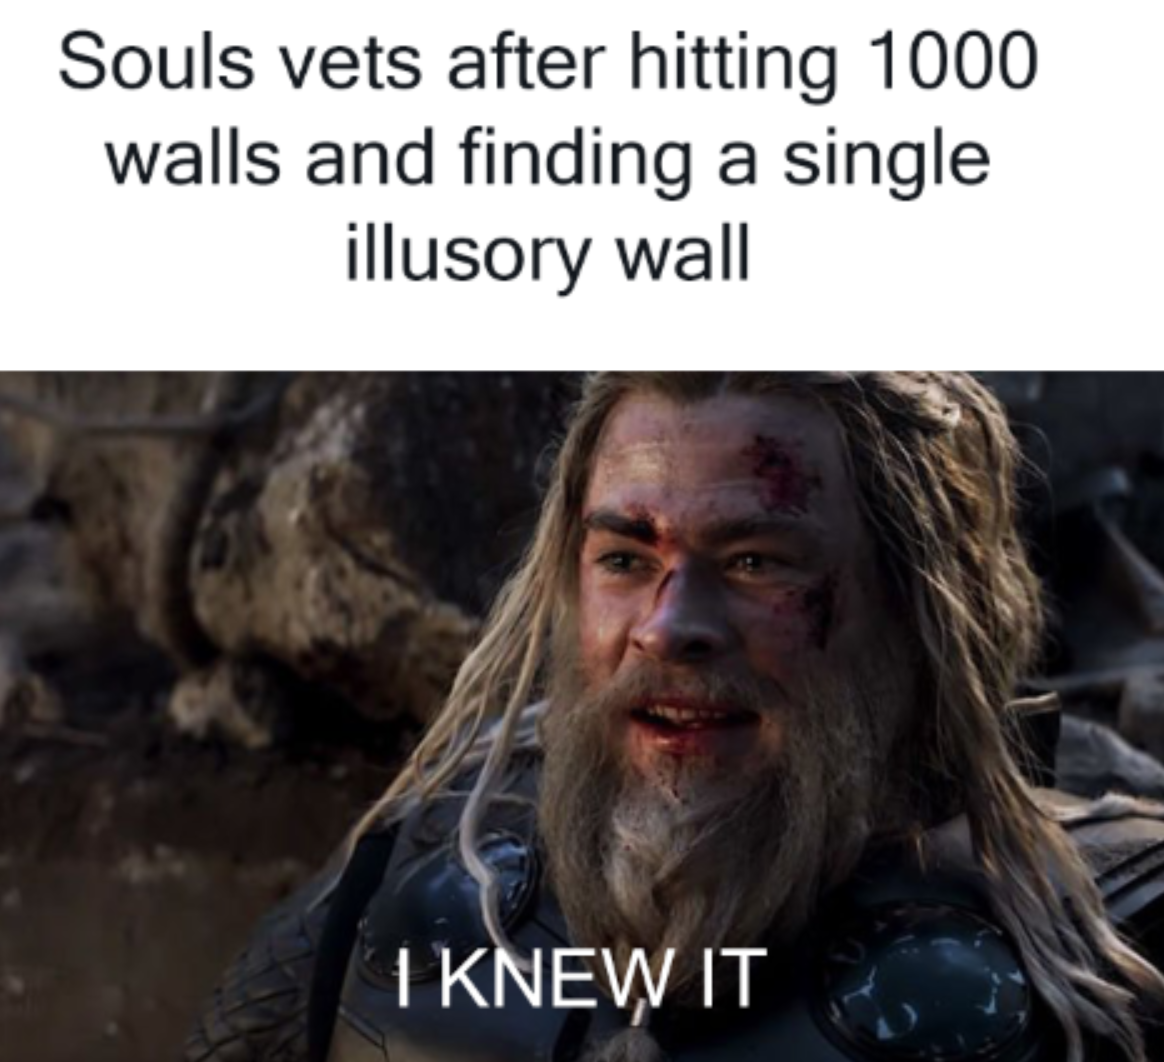 elden ring memes - Elden Ring - Souls vets after hitting 1000 walls and finding a single illusory wall I Knew It